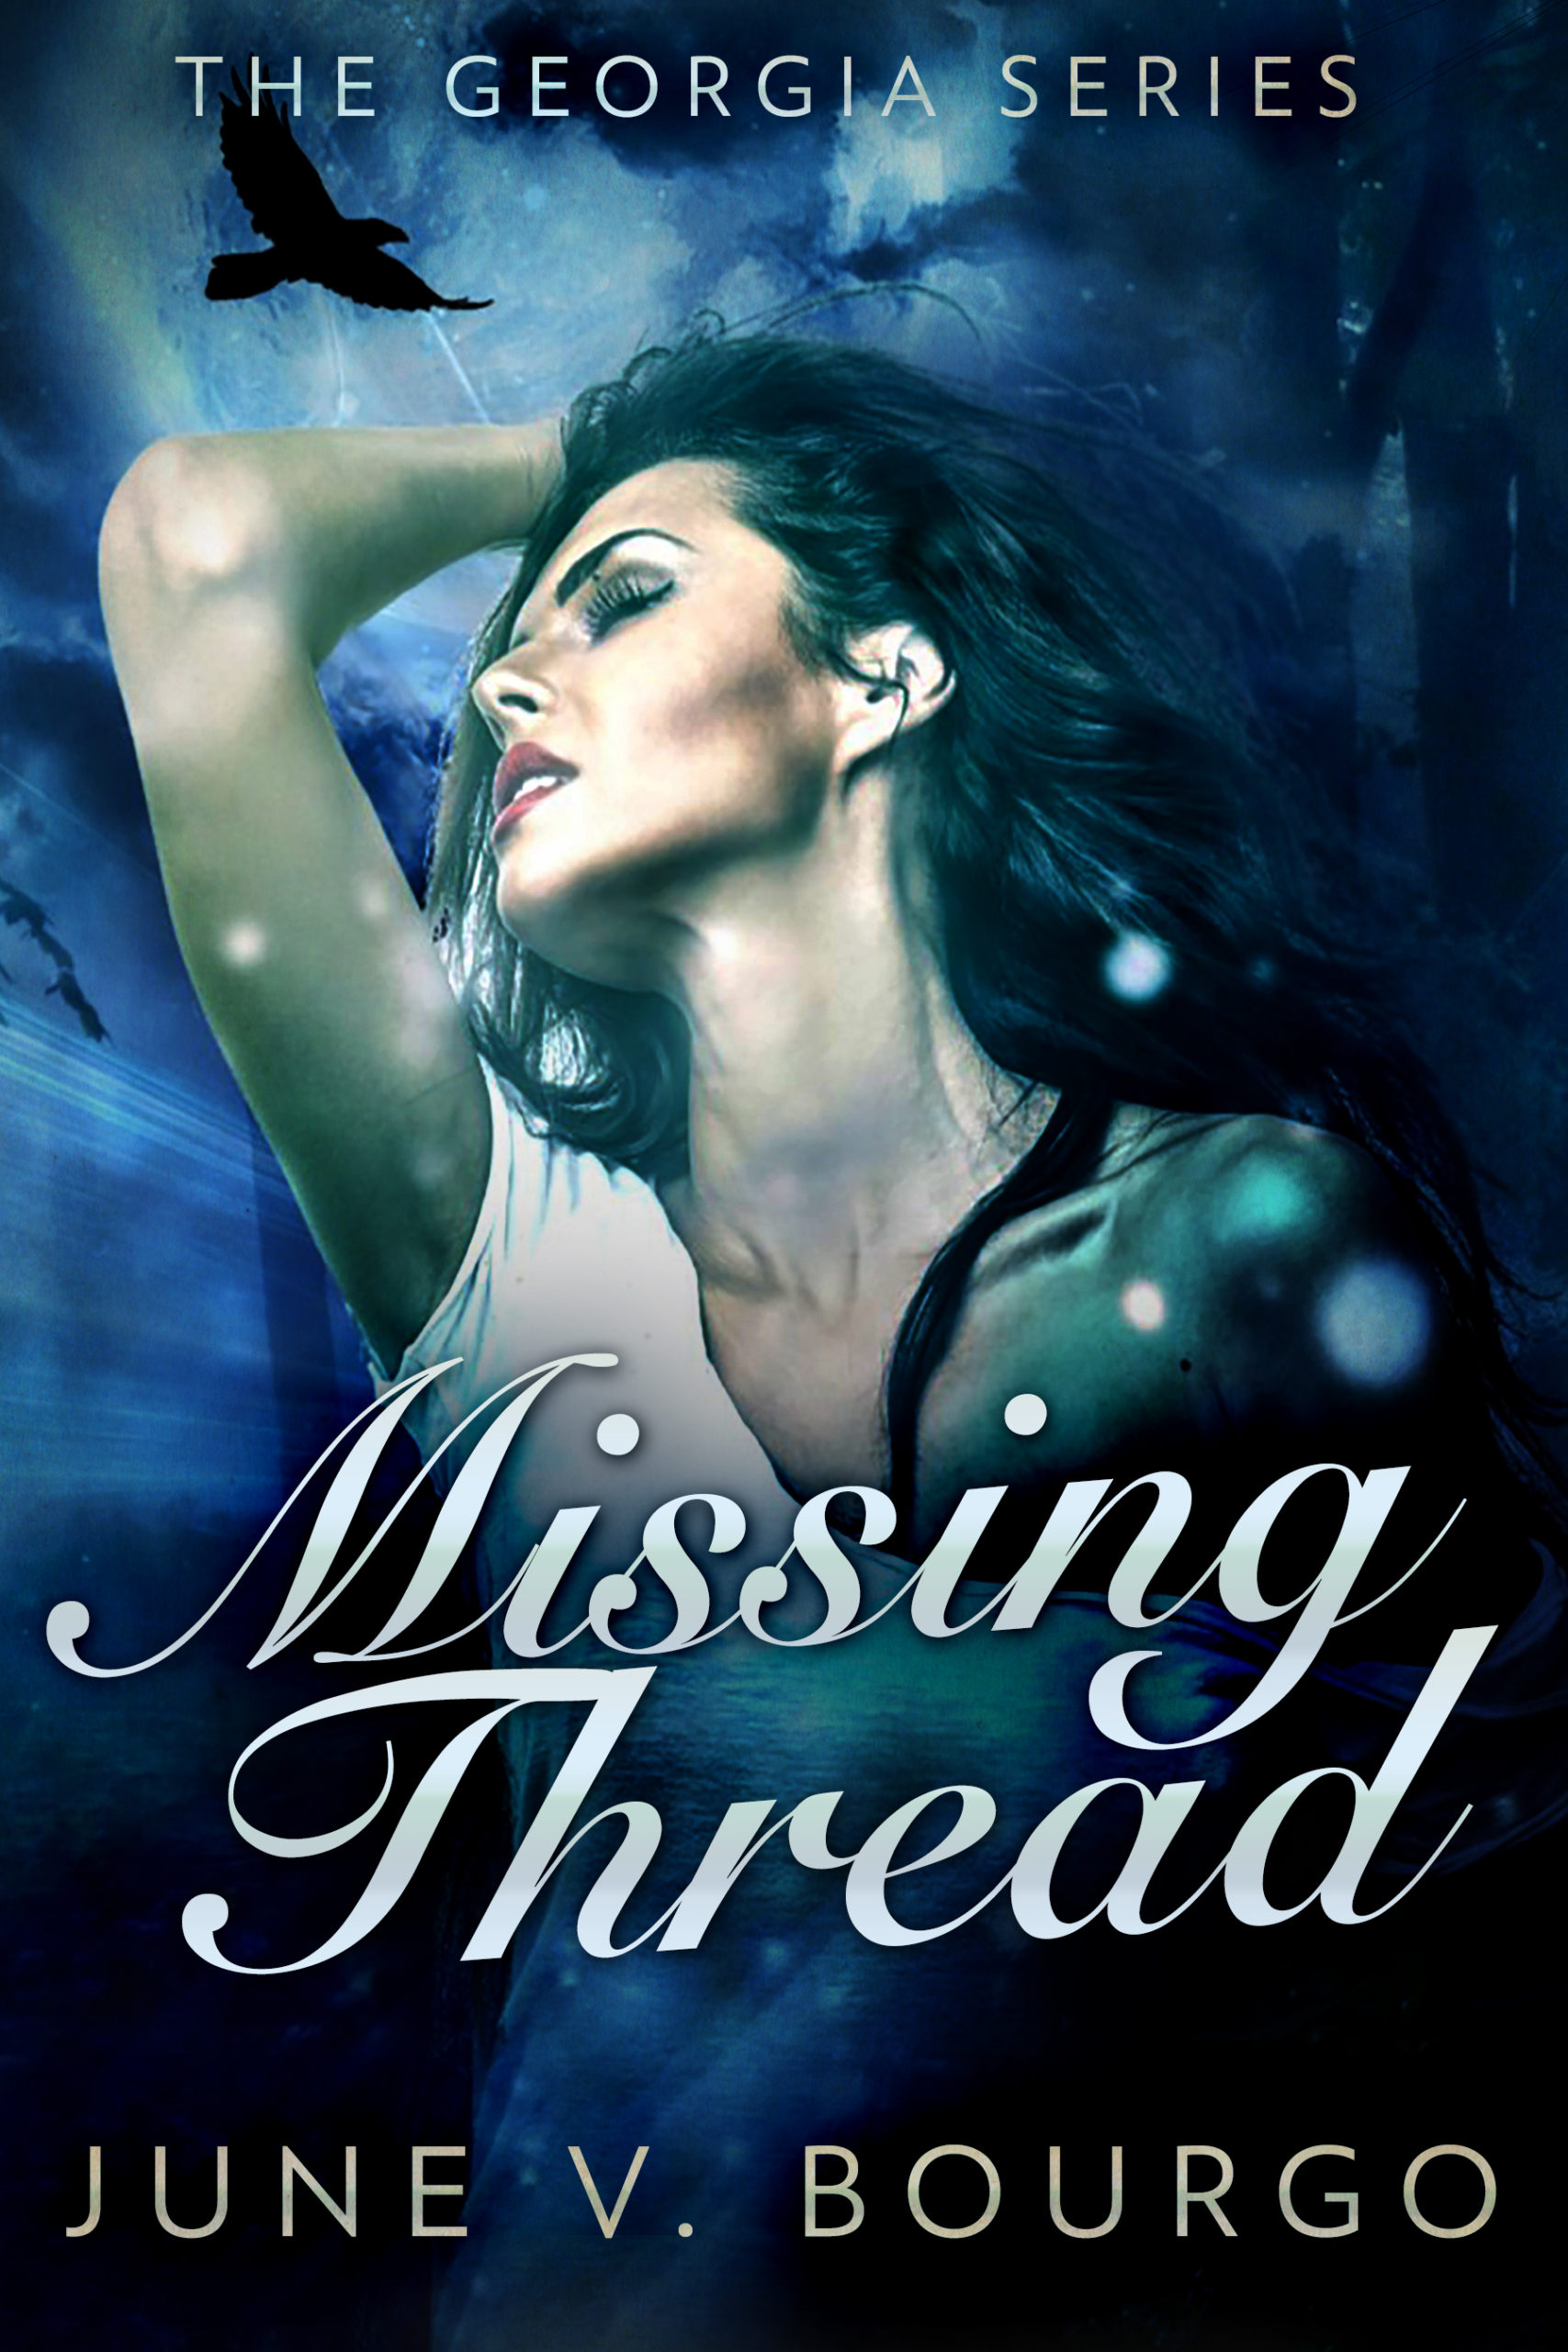 FREE: Missing Thread by June V. Bourgo